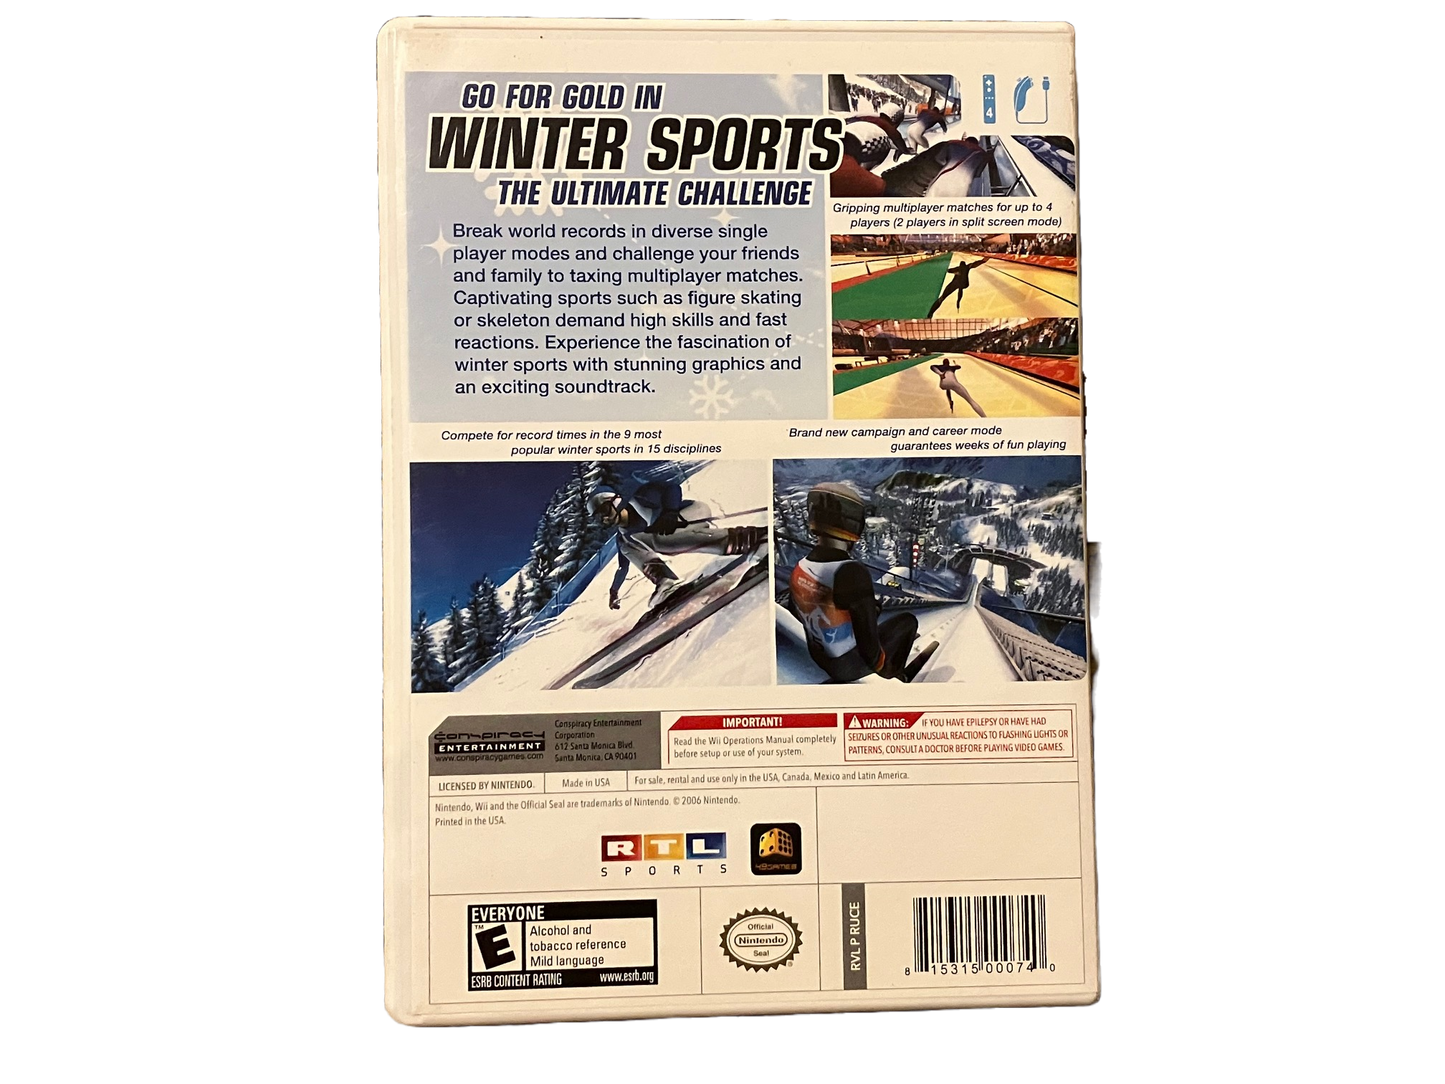 Winter Sports The Ultimate Challenge Nintendo Wii Game